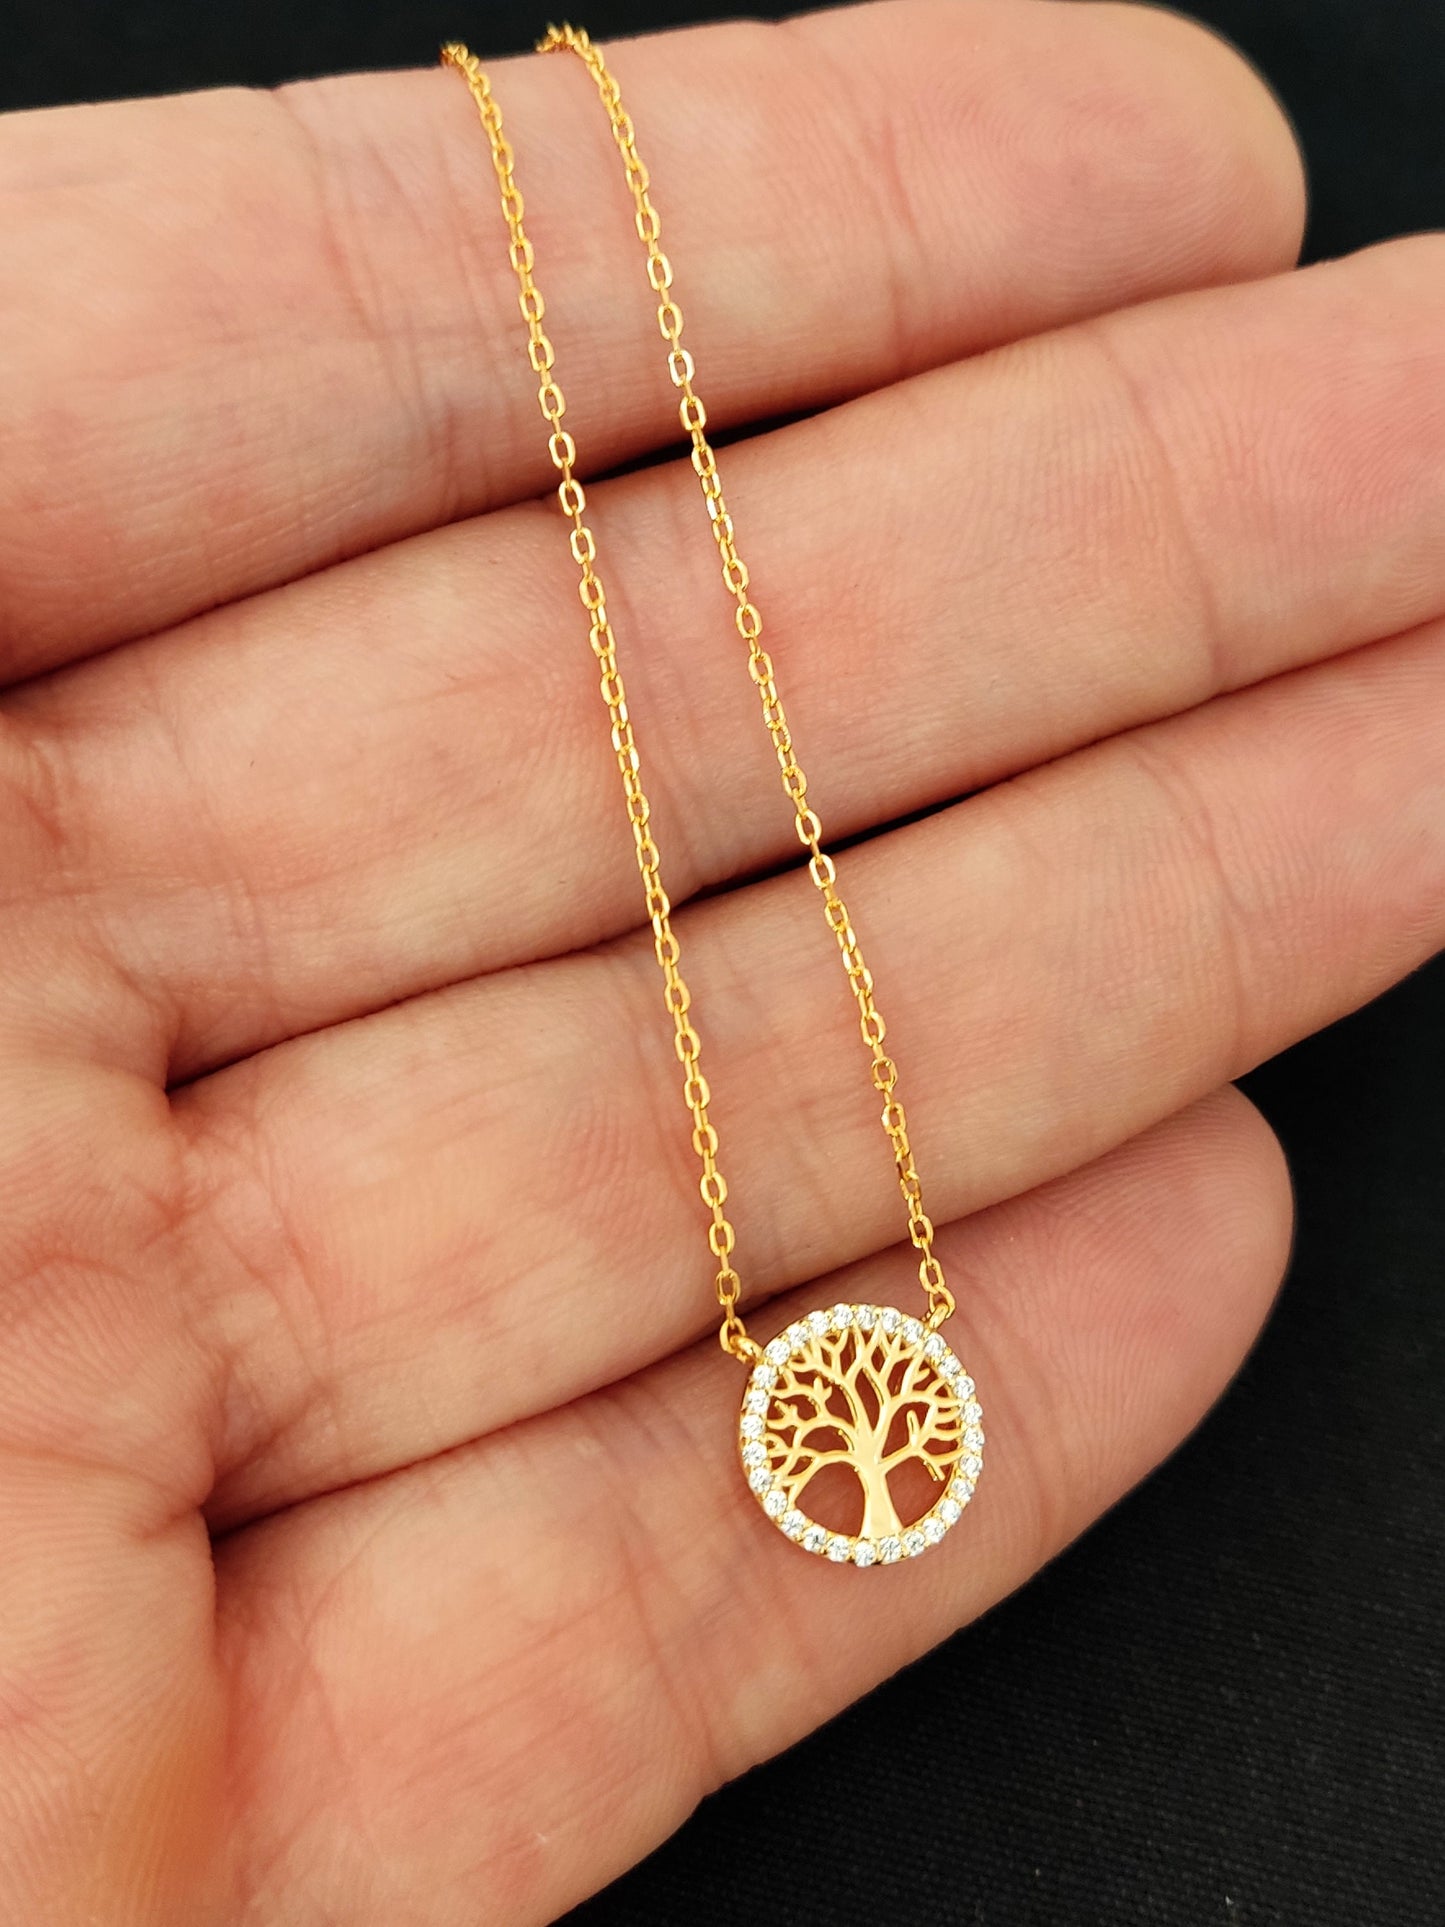 Sterling Silver 925 Silver-Gold-Rose Gold Small Tree Of Life Tiny Pendant Necklace, Tree Of Life Pendant 12mm, Minimalist Necklace Jewelry